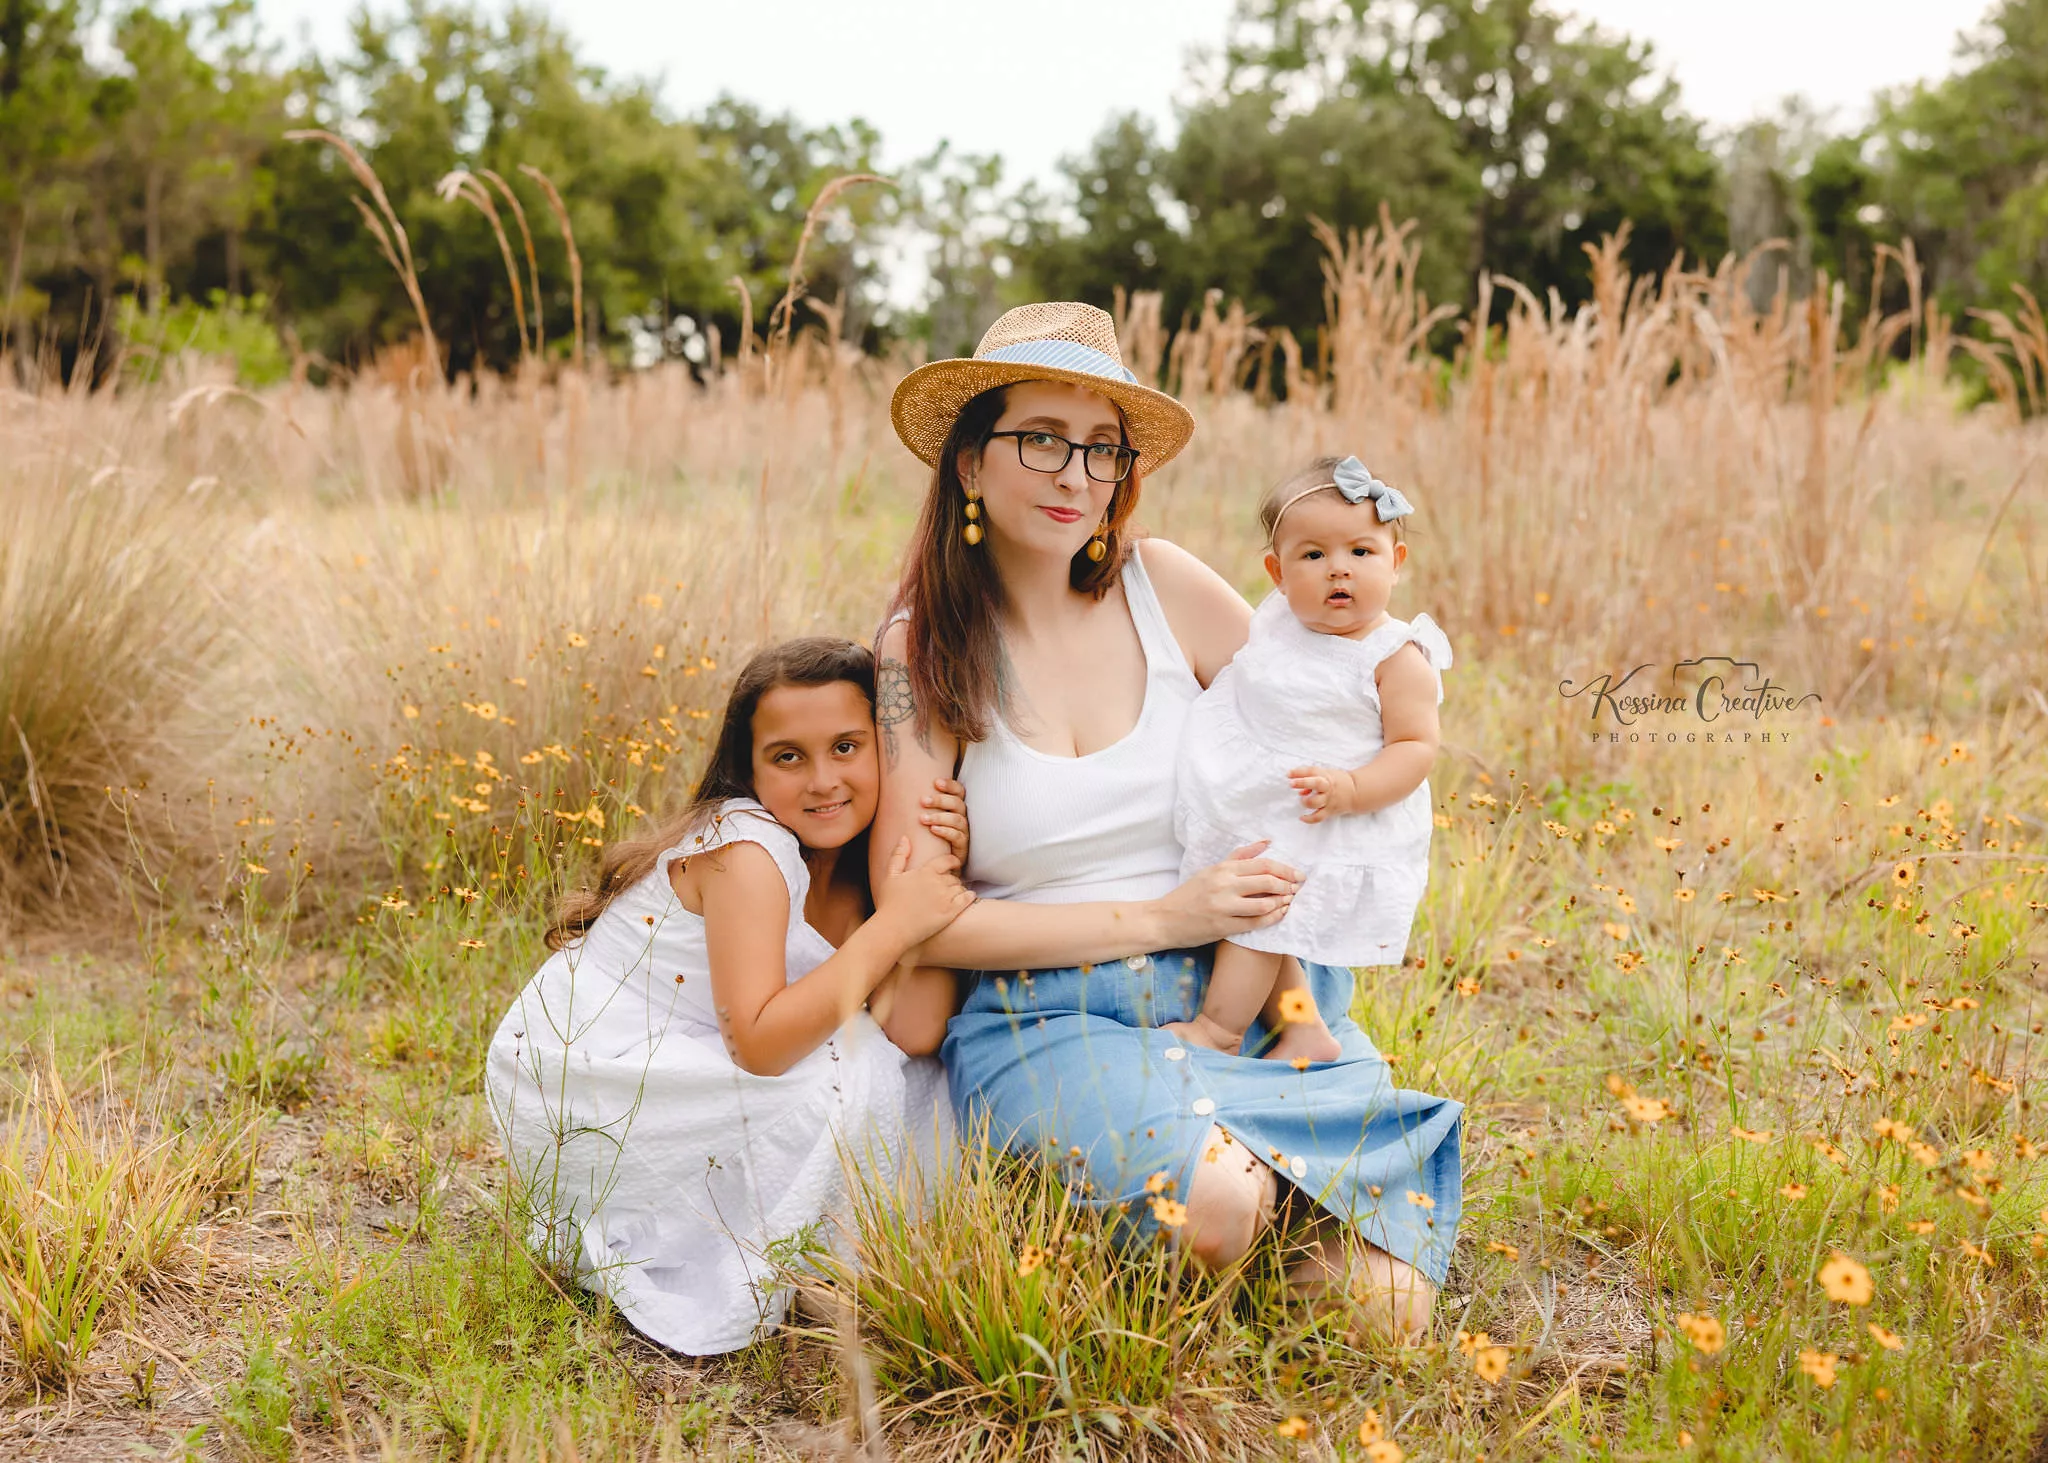 Orlando Family Photographer Motherhood Photo session mommy and me mini session outdoor in wheat field